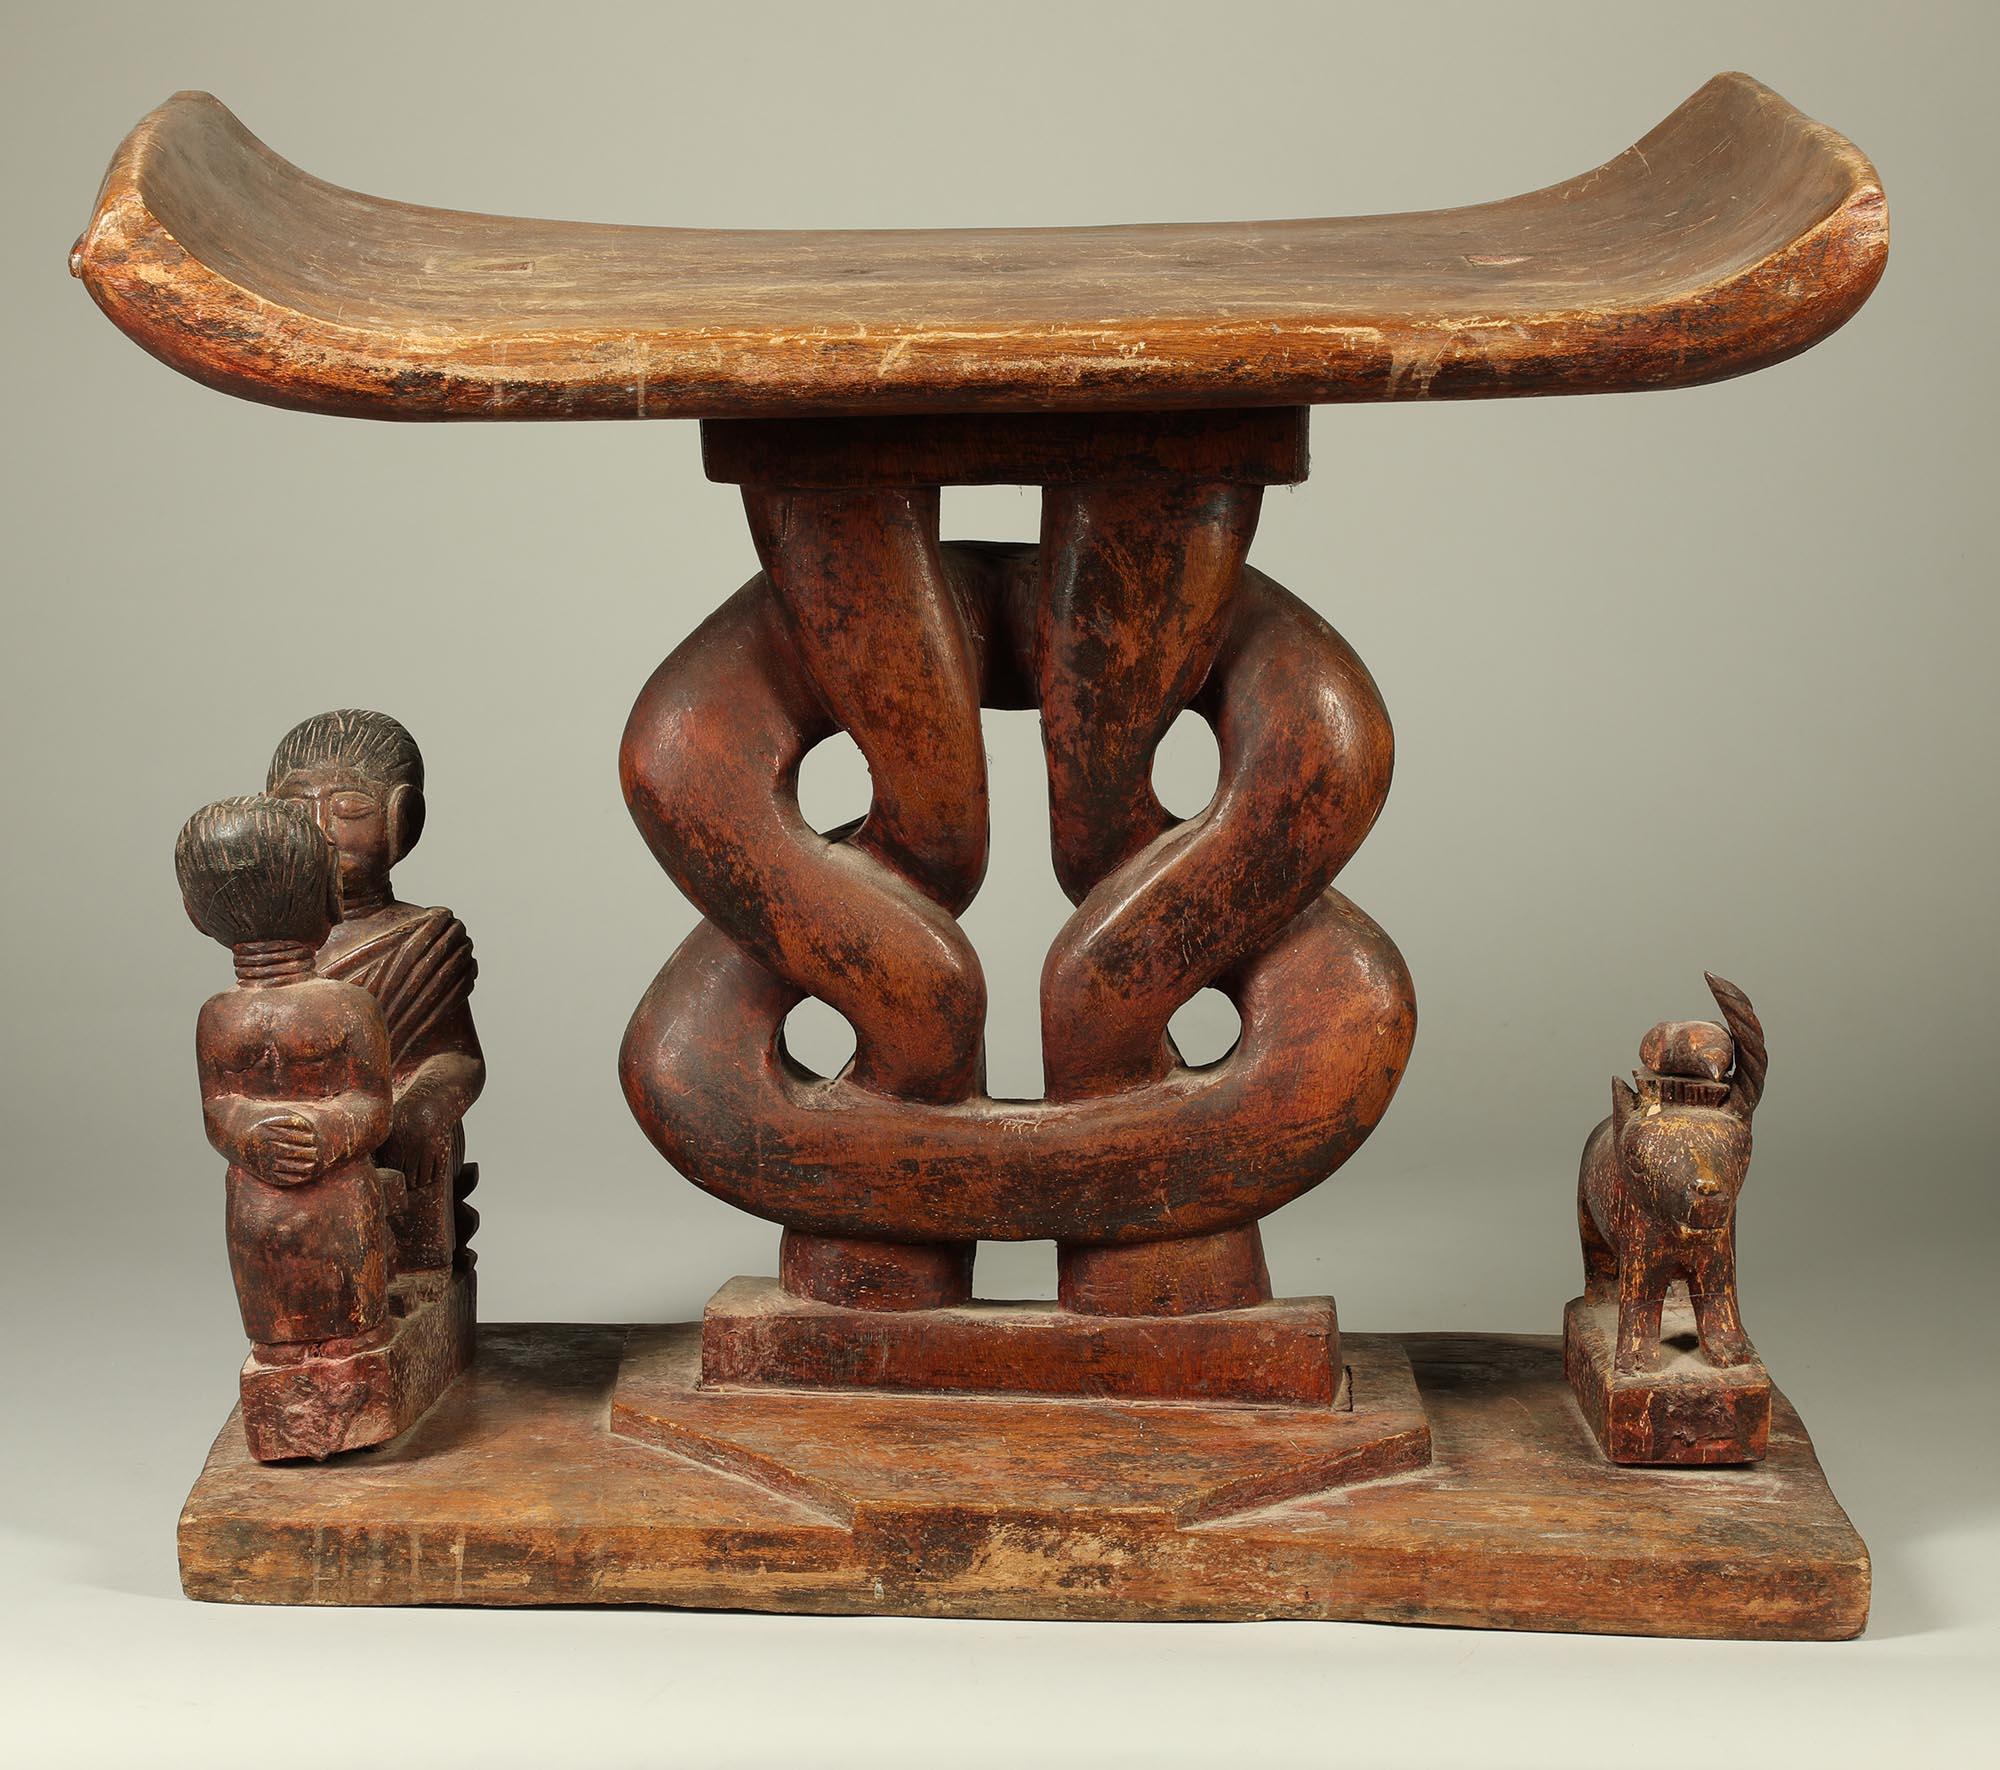 The supports for Akan stools take many forms, they can be purely geometric or architectural with simple posts and columns, or, as in this case, an endless knot form supporting the curved seat.
Created in the early to mid-20th century, by an